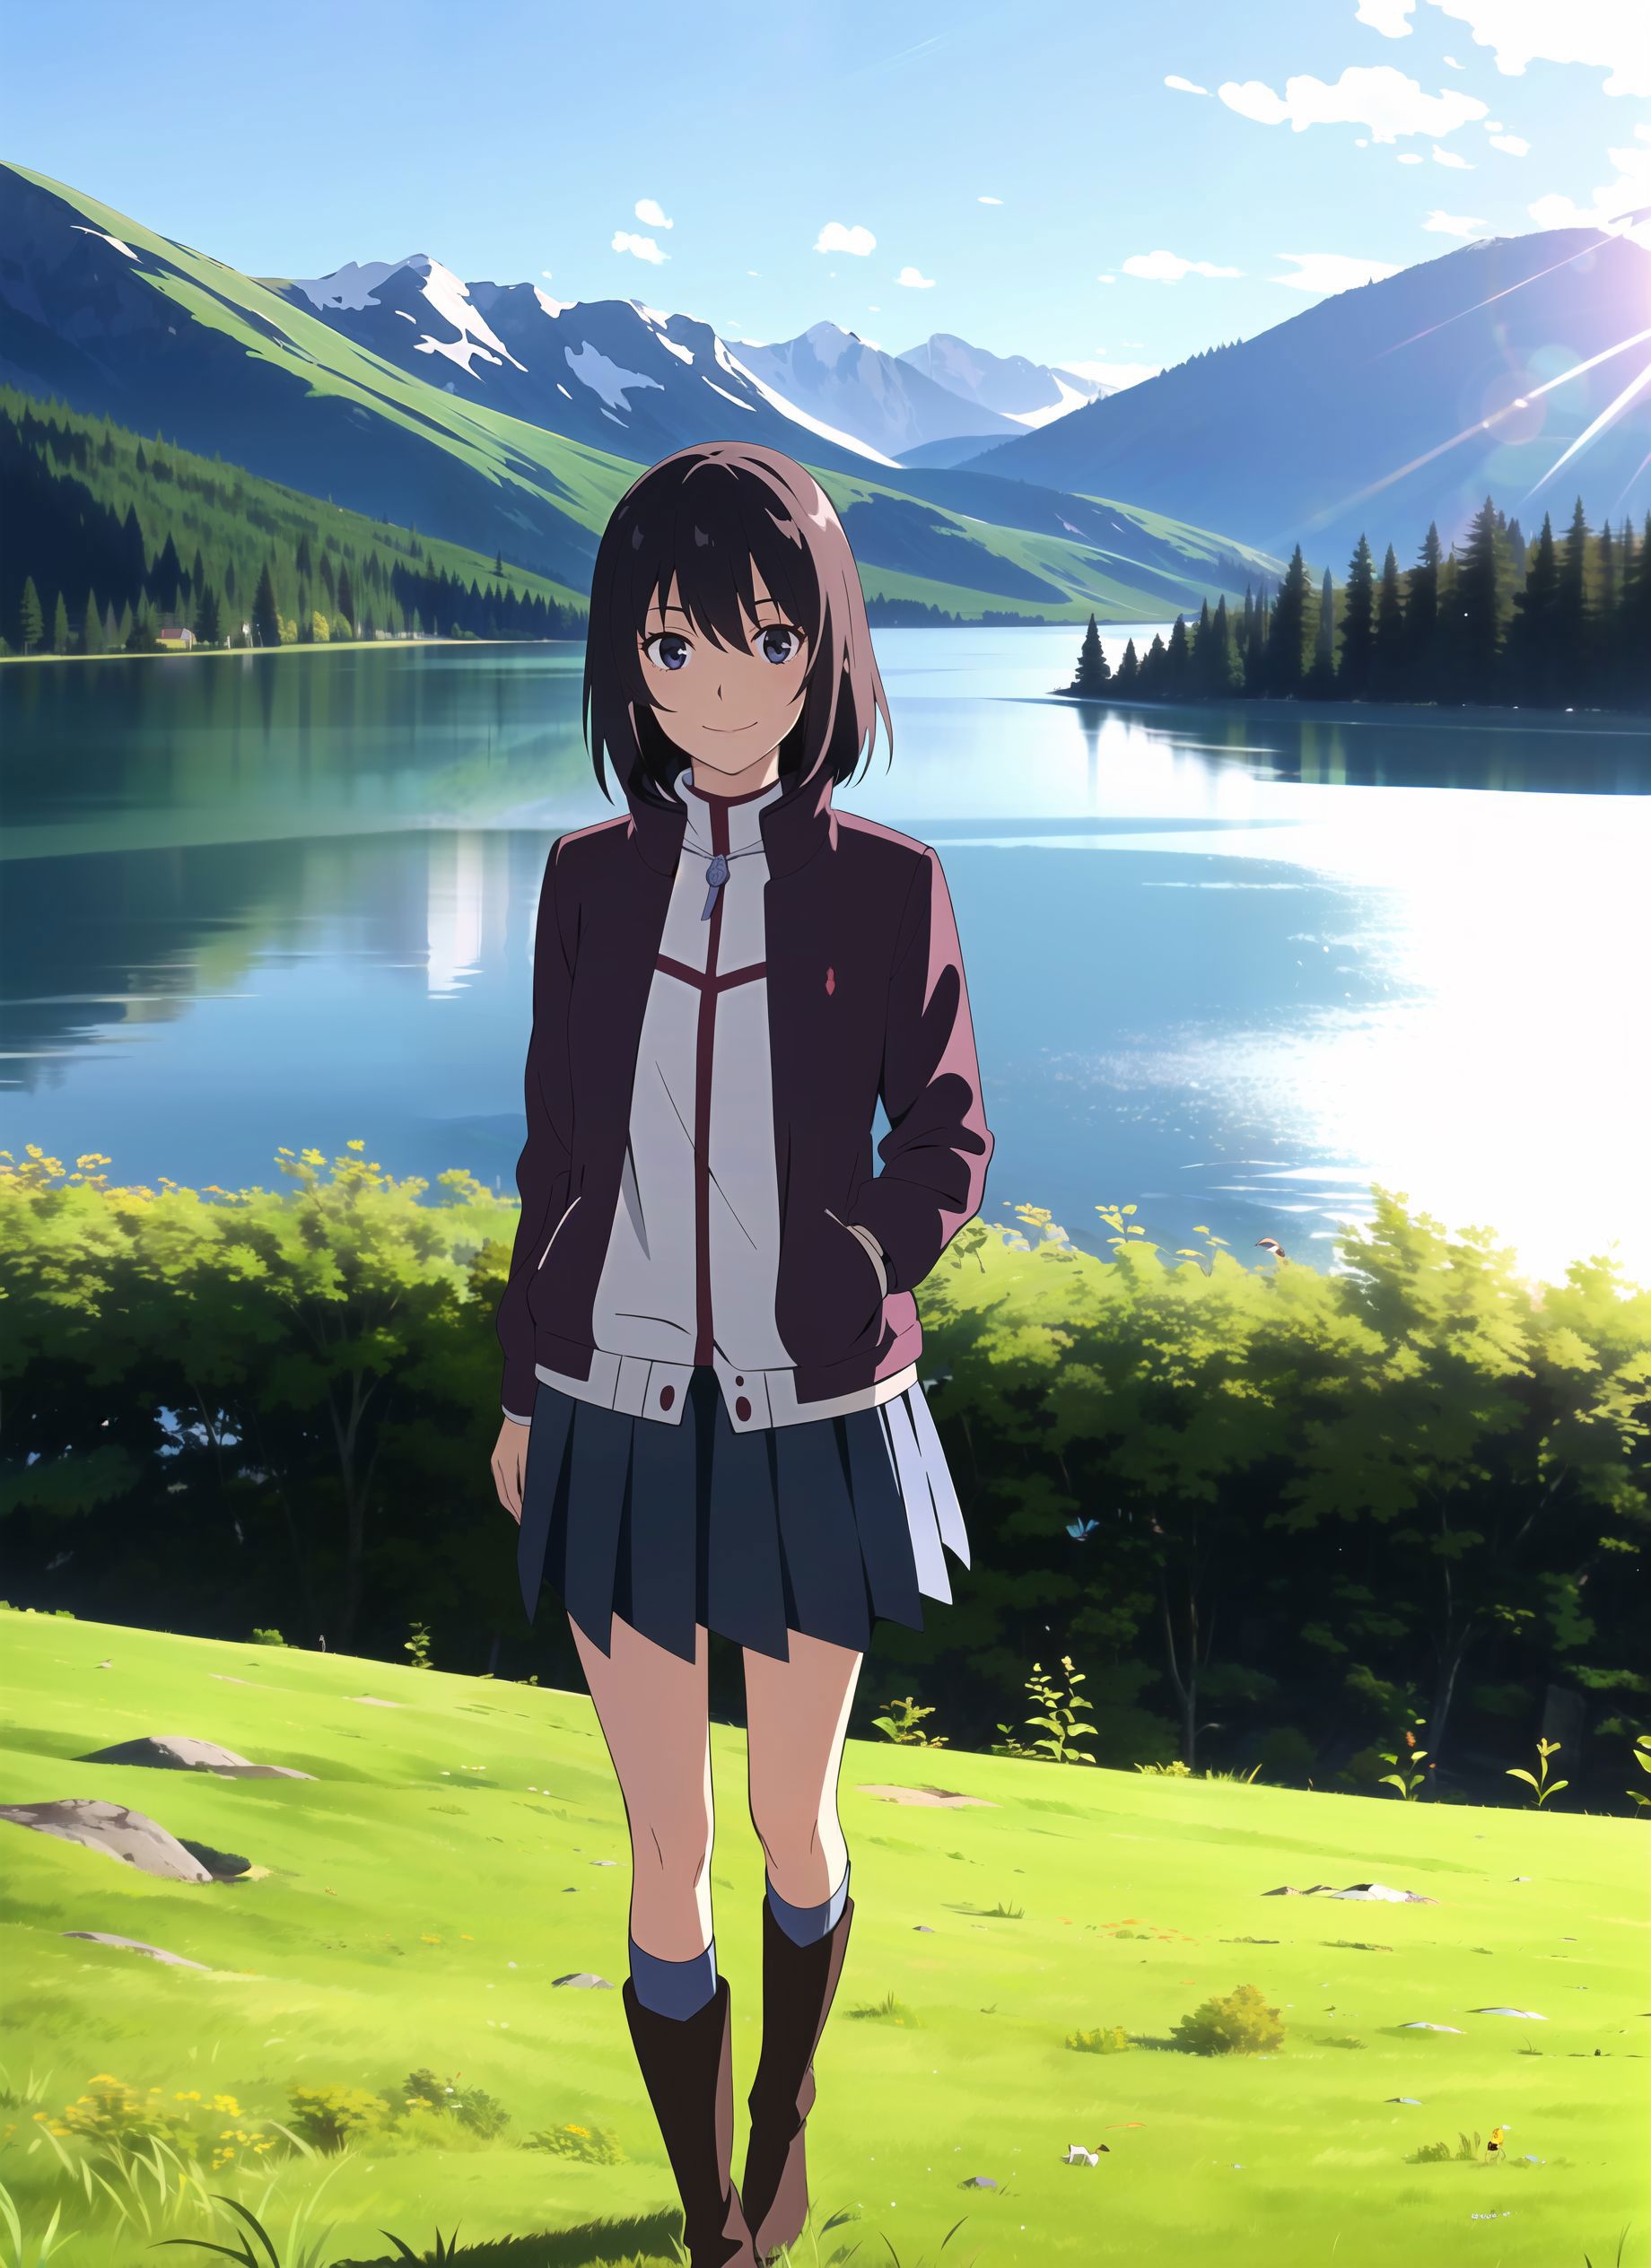 A girl wearing a maroon jacket and a skirt stands on a hill overlooking a lake.